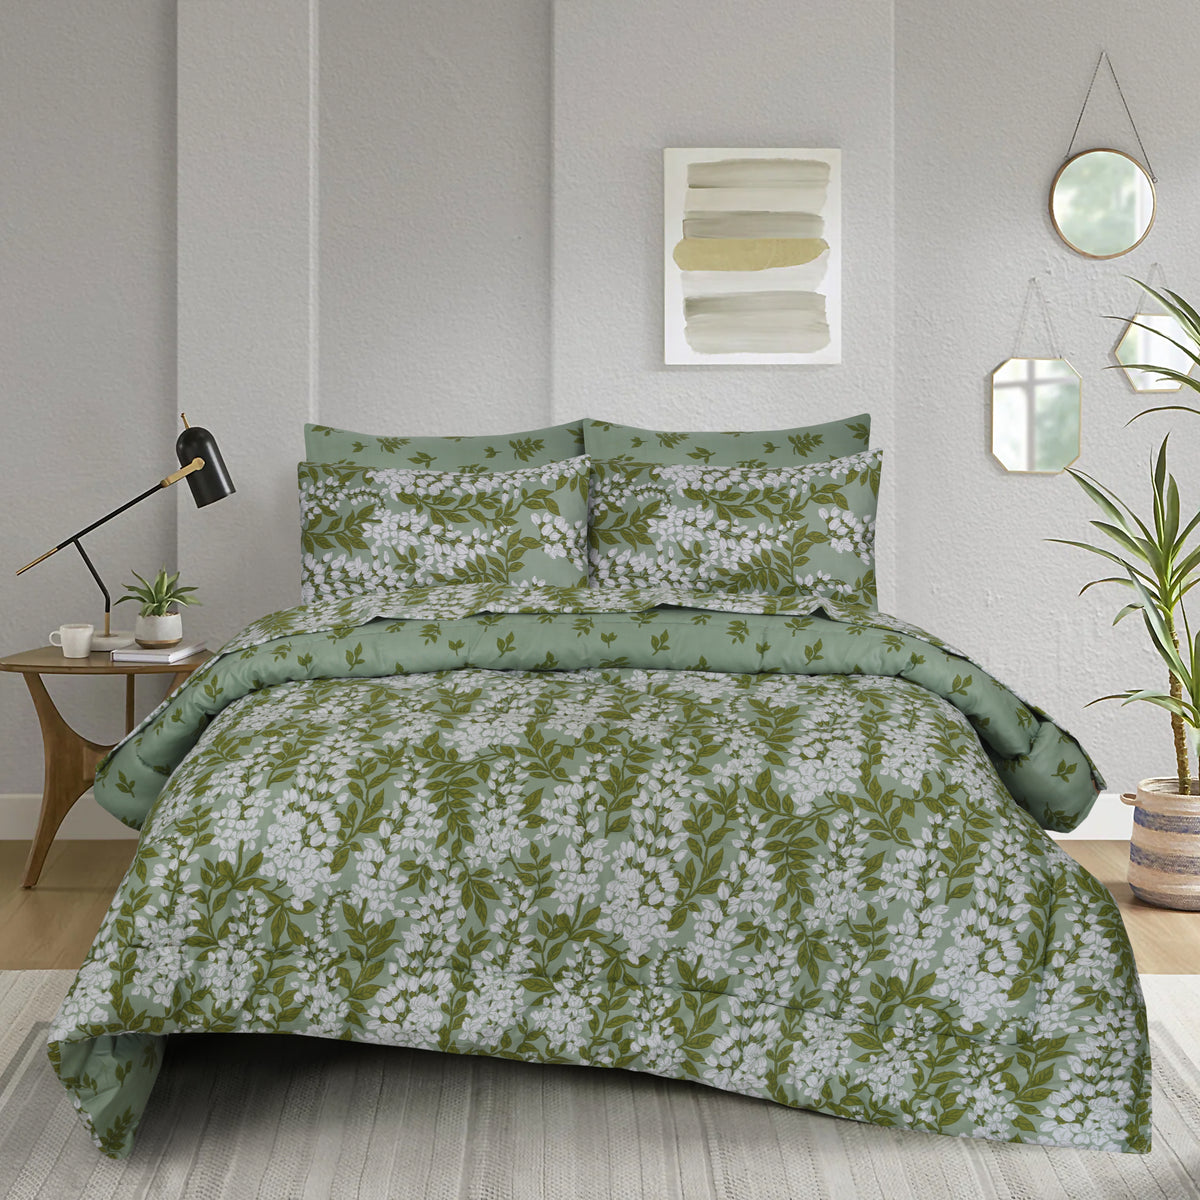 Green Abstract - 6 pc Winter Comforter Set (Heavy Filling).